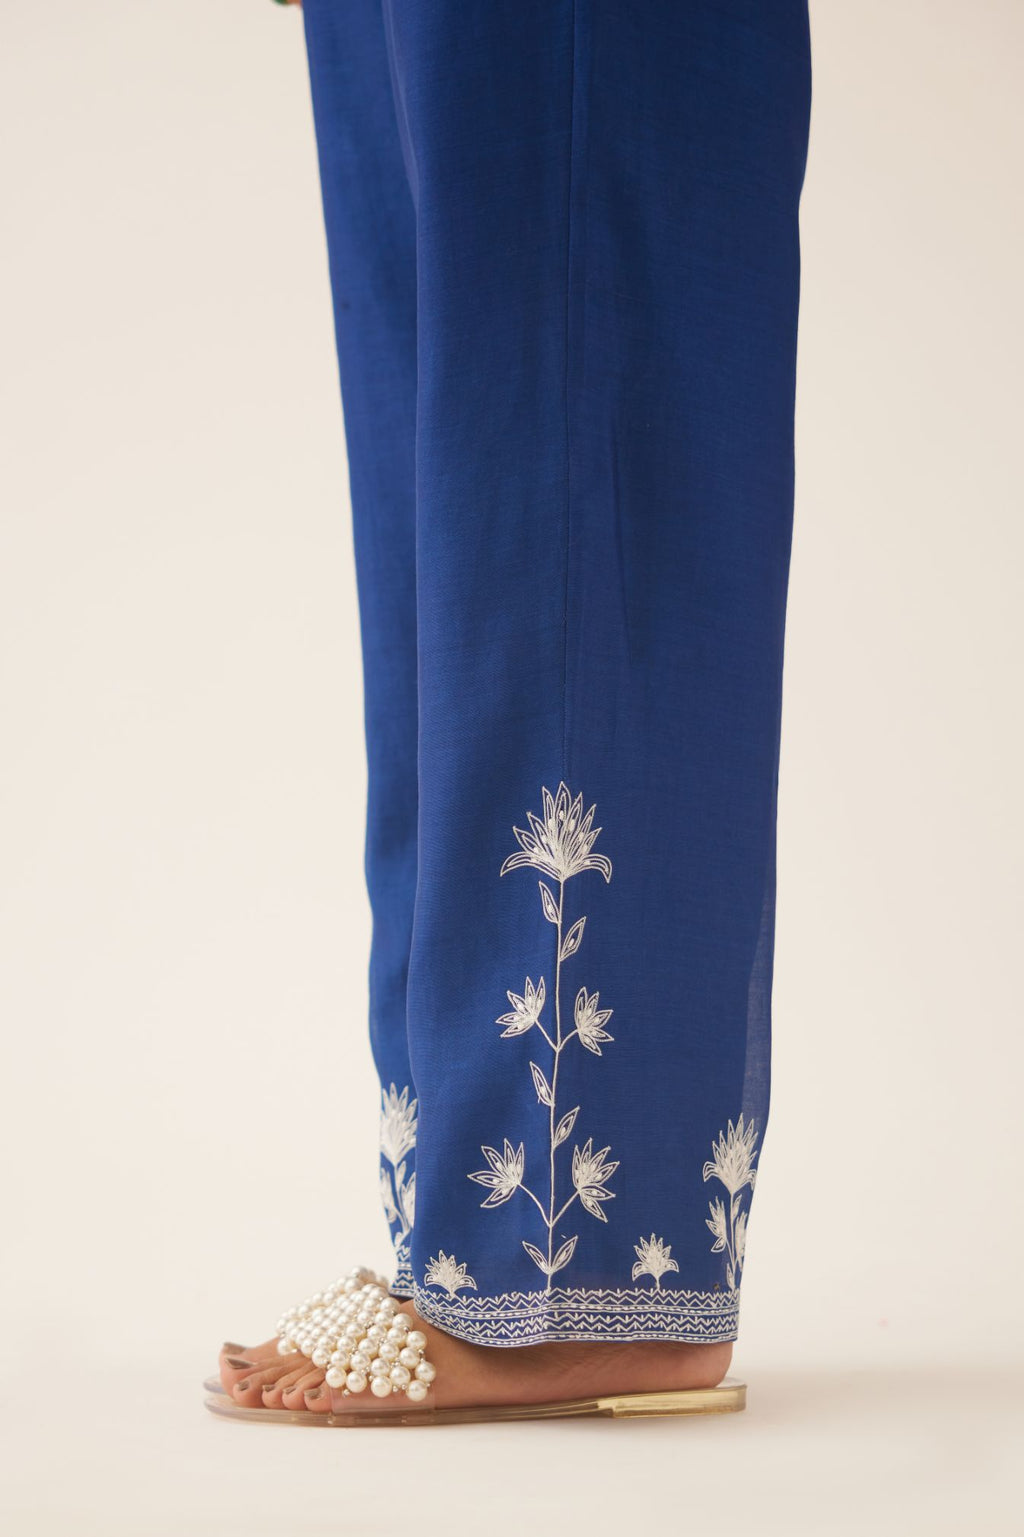 Blue silk chanderi straight pants with off white silk thread embroidery at hem.